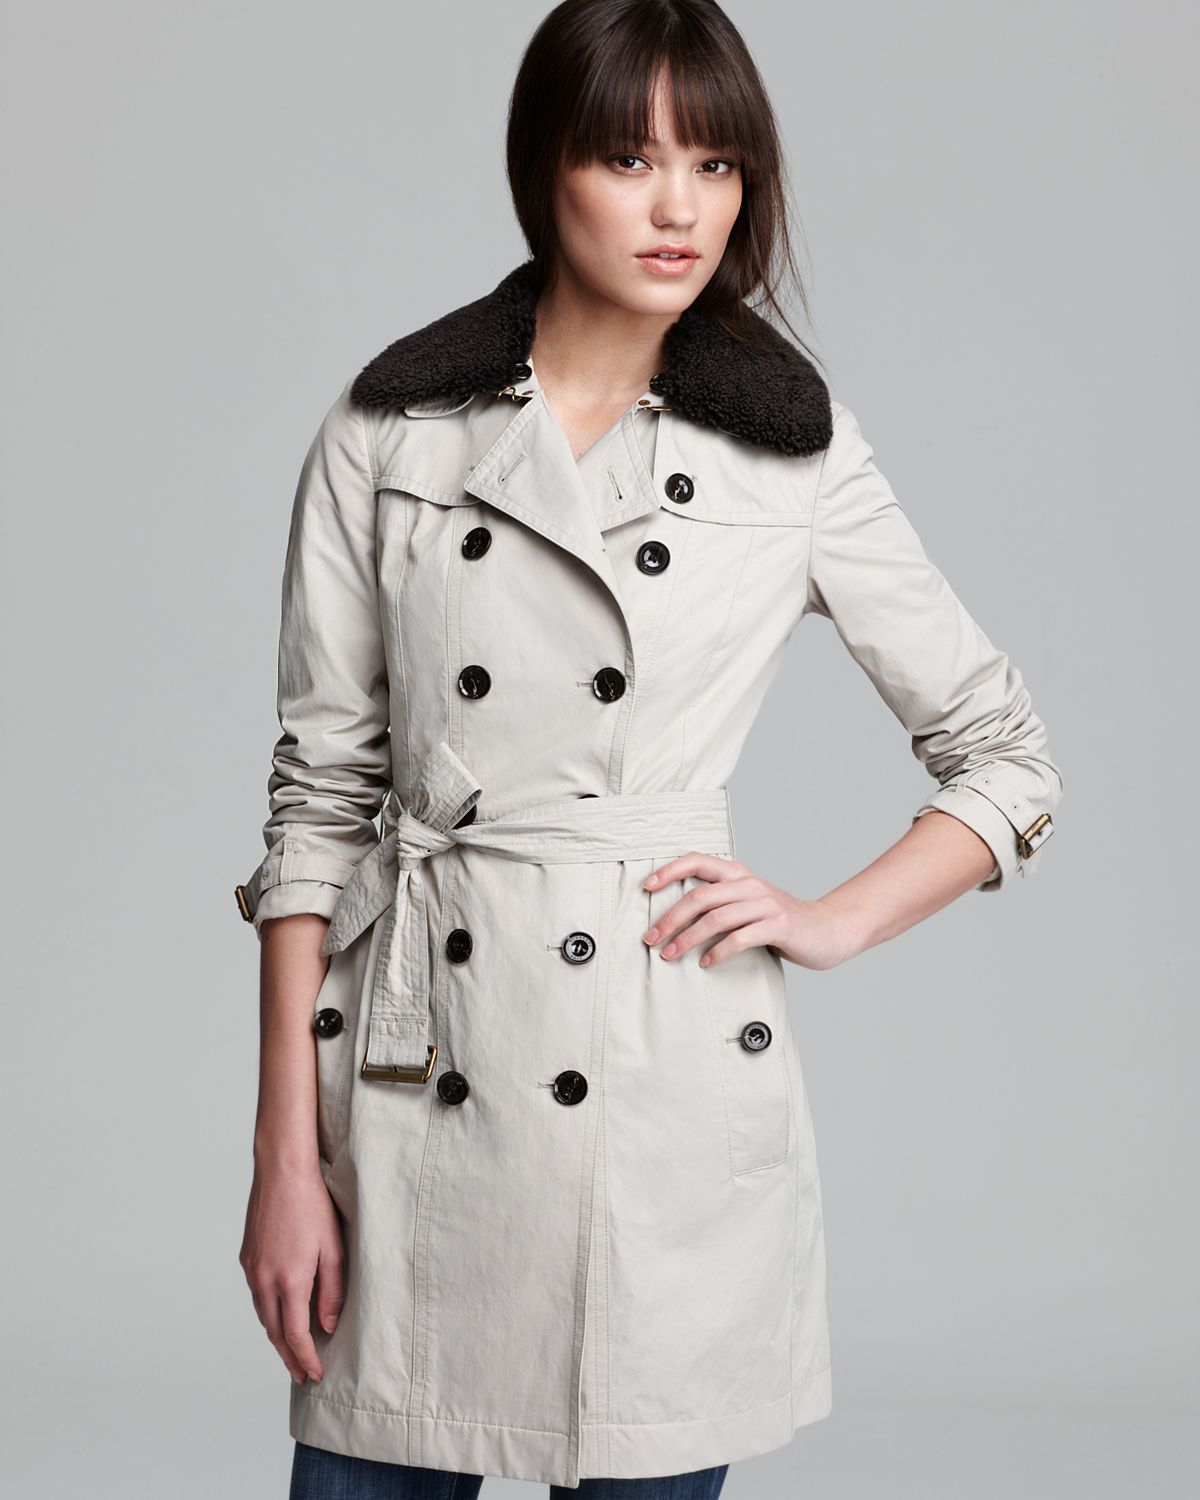 Lyst - Burberry Brit Eastcourt Trench Coat with Shearling Collar in White